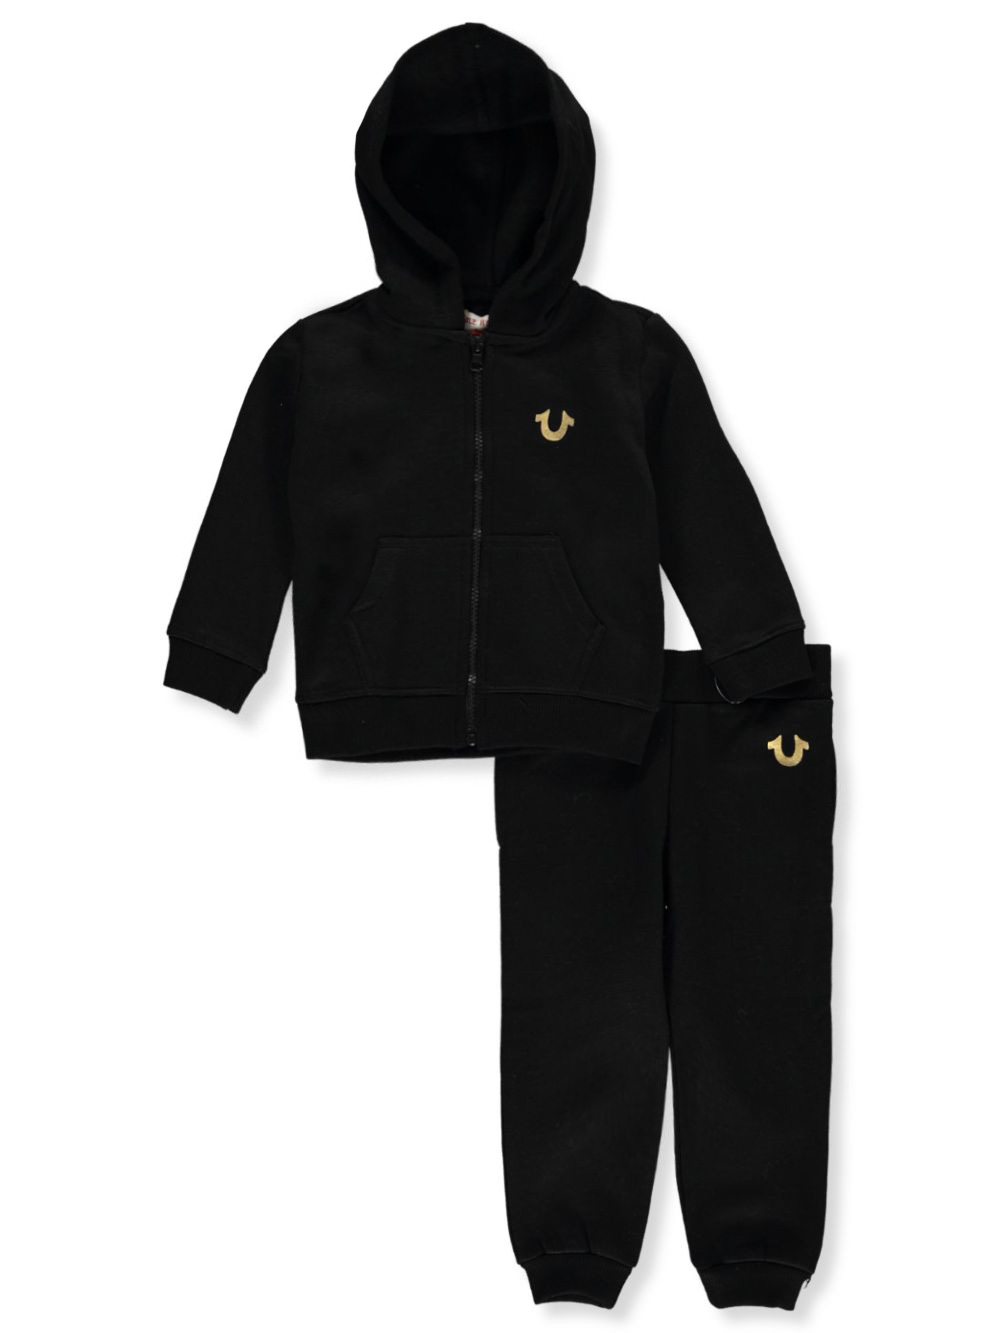 Baby Boys' 2-Piece Sweatsuit Outfit by 